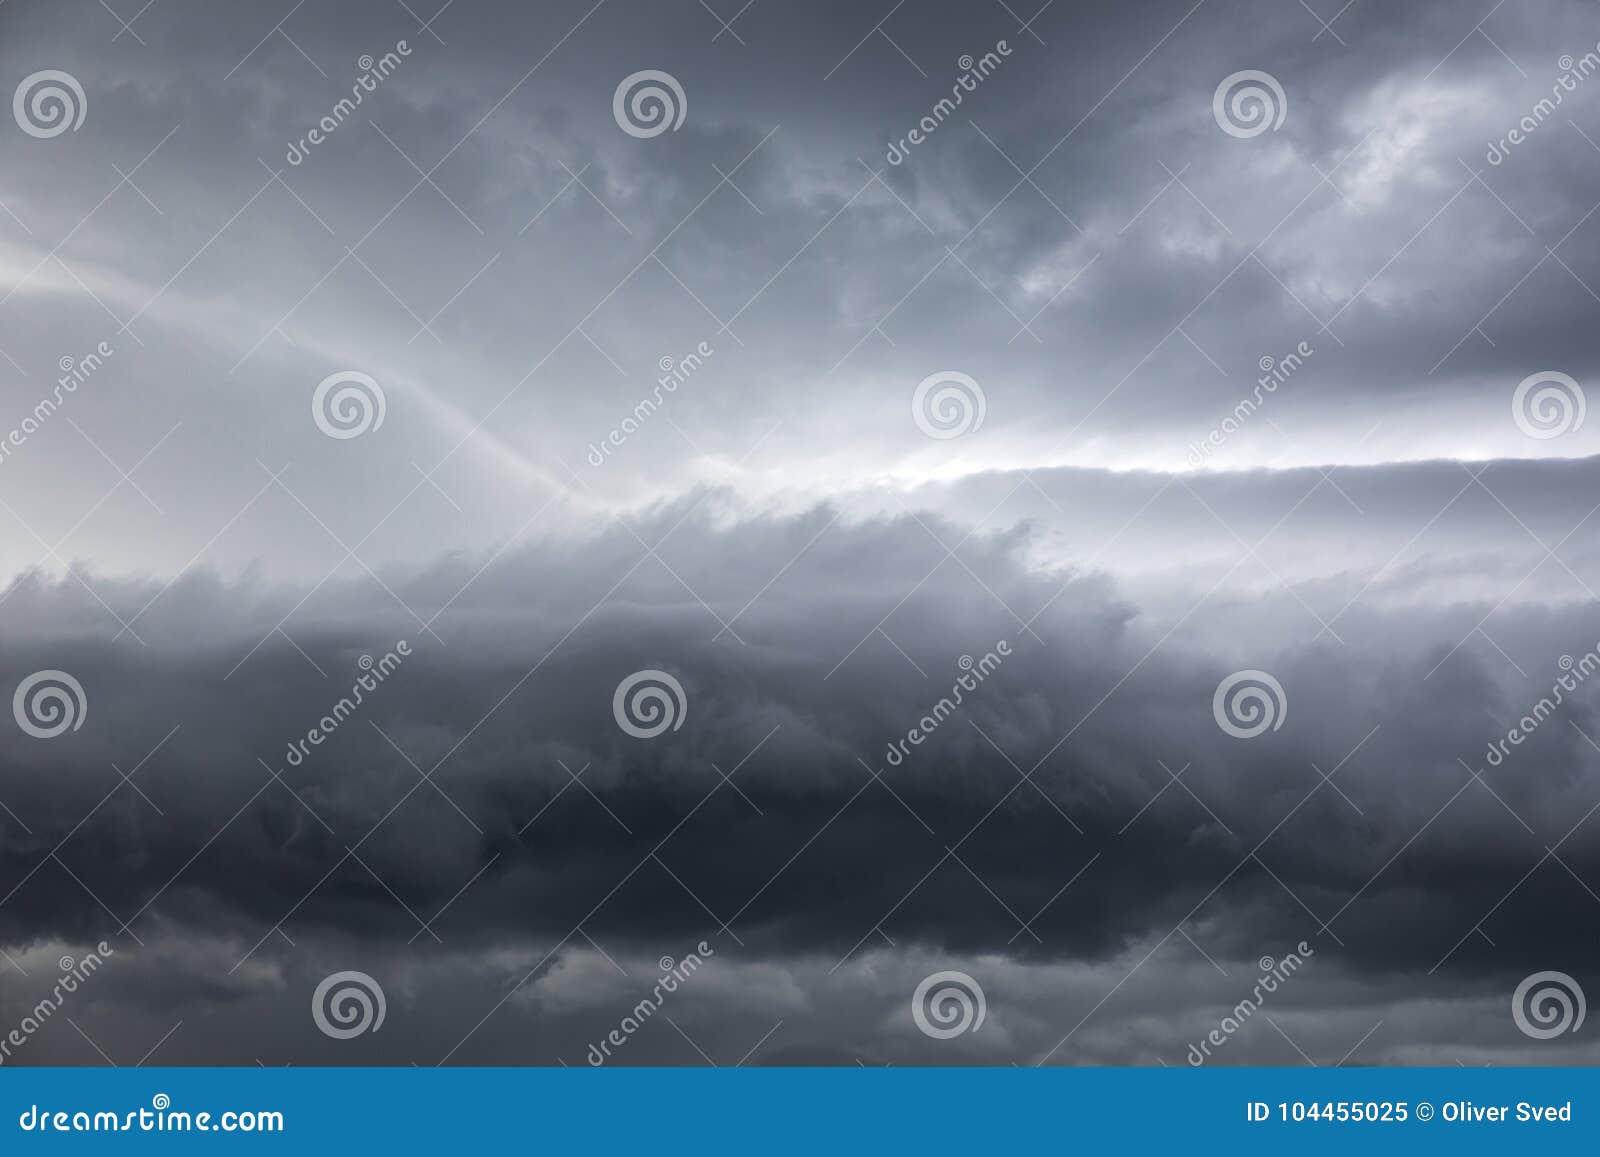 stormclouds gathering on the sky